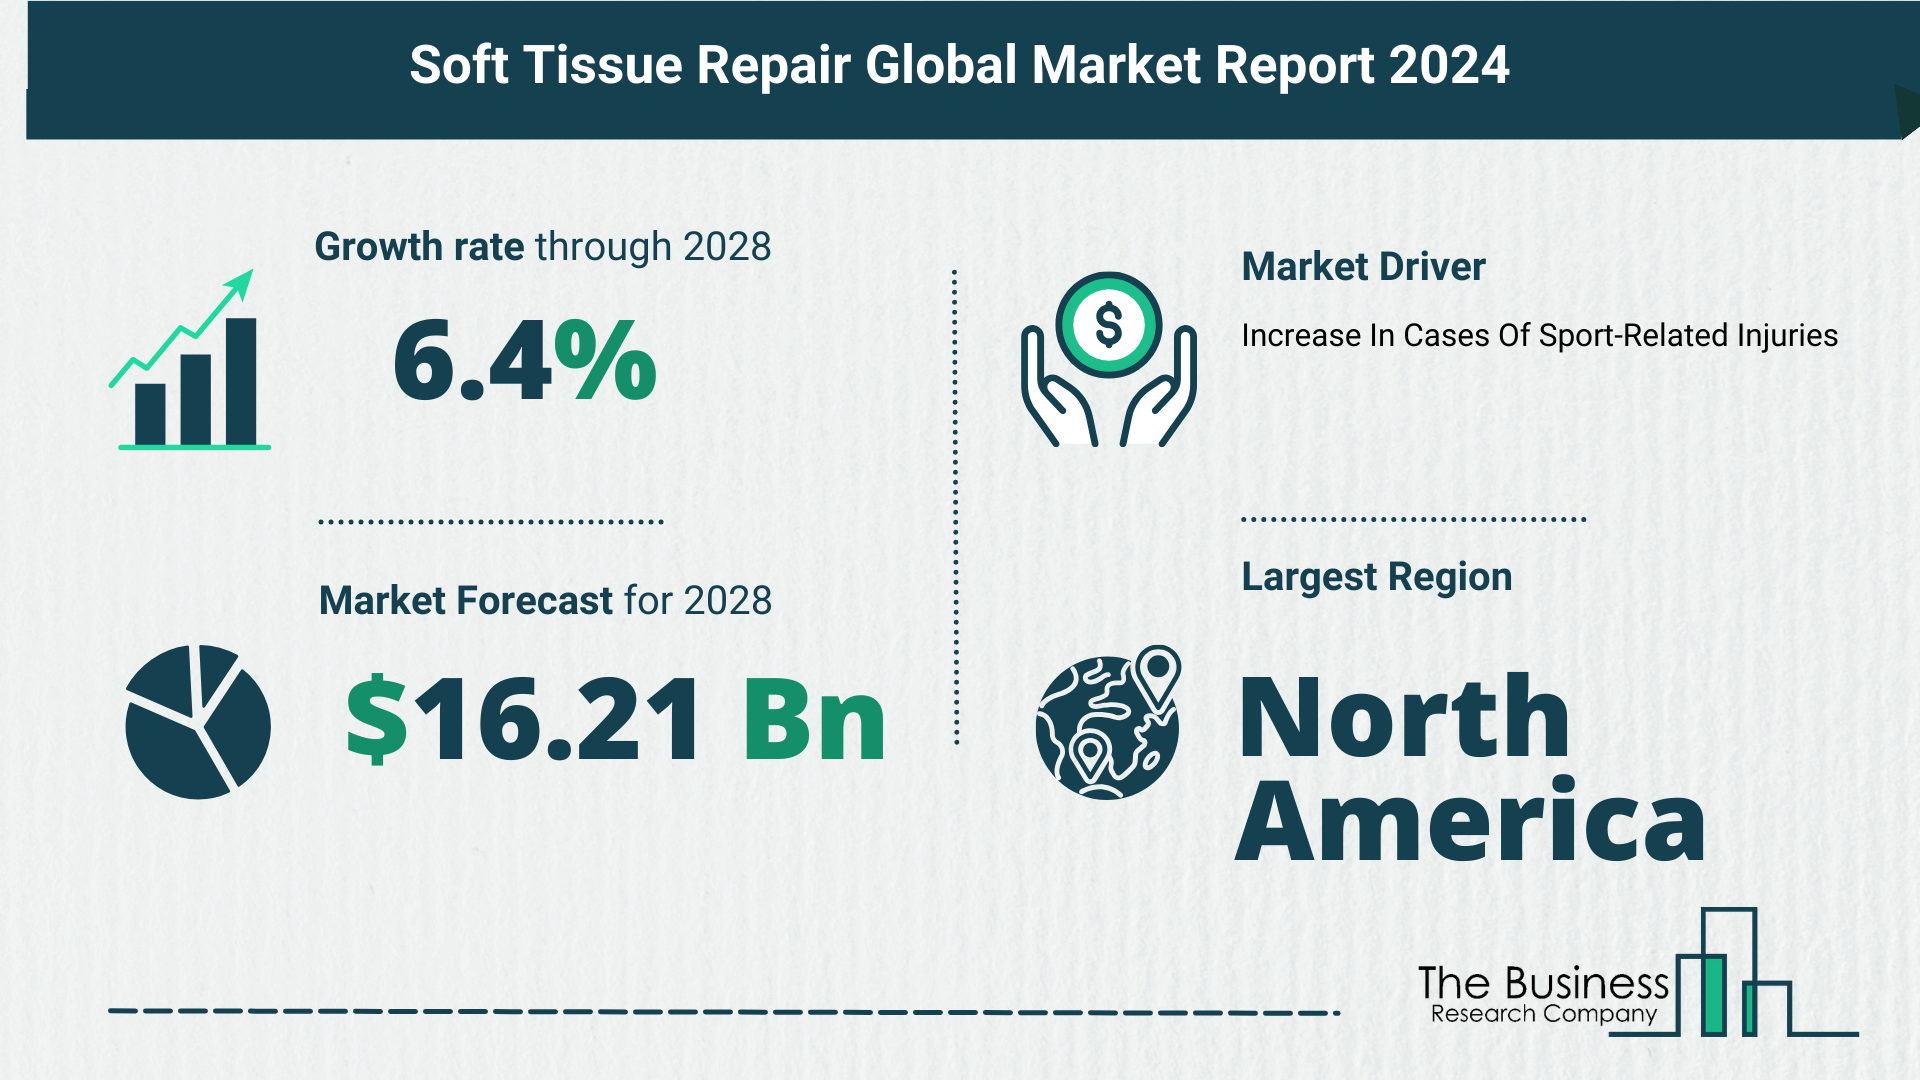 What Is The Forecast Growth Rate For The Soft Tissue Repair Market?